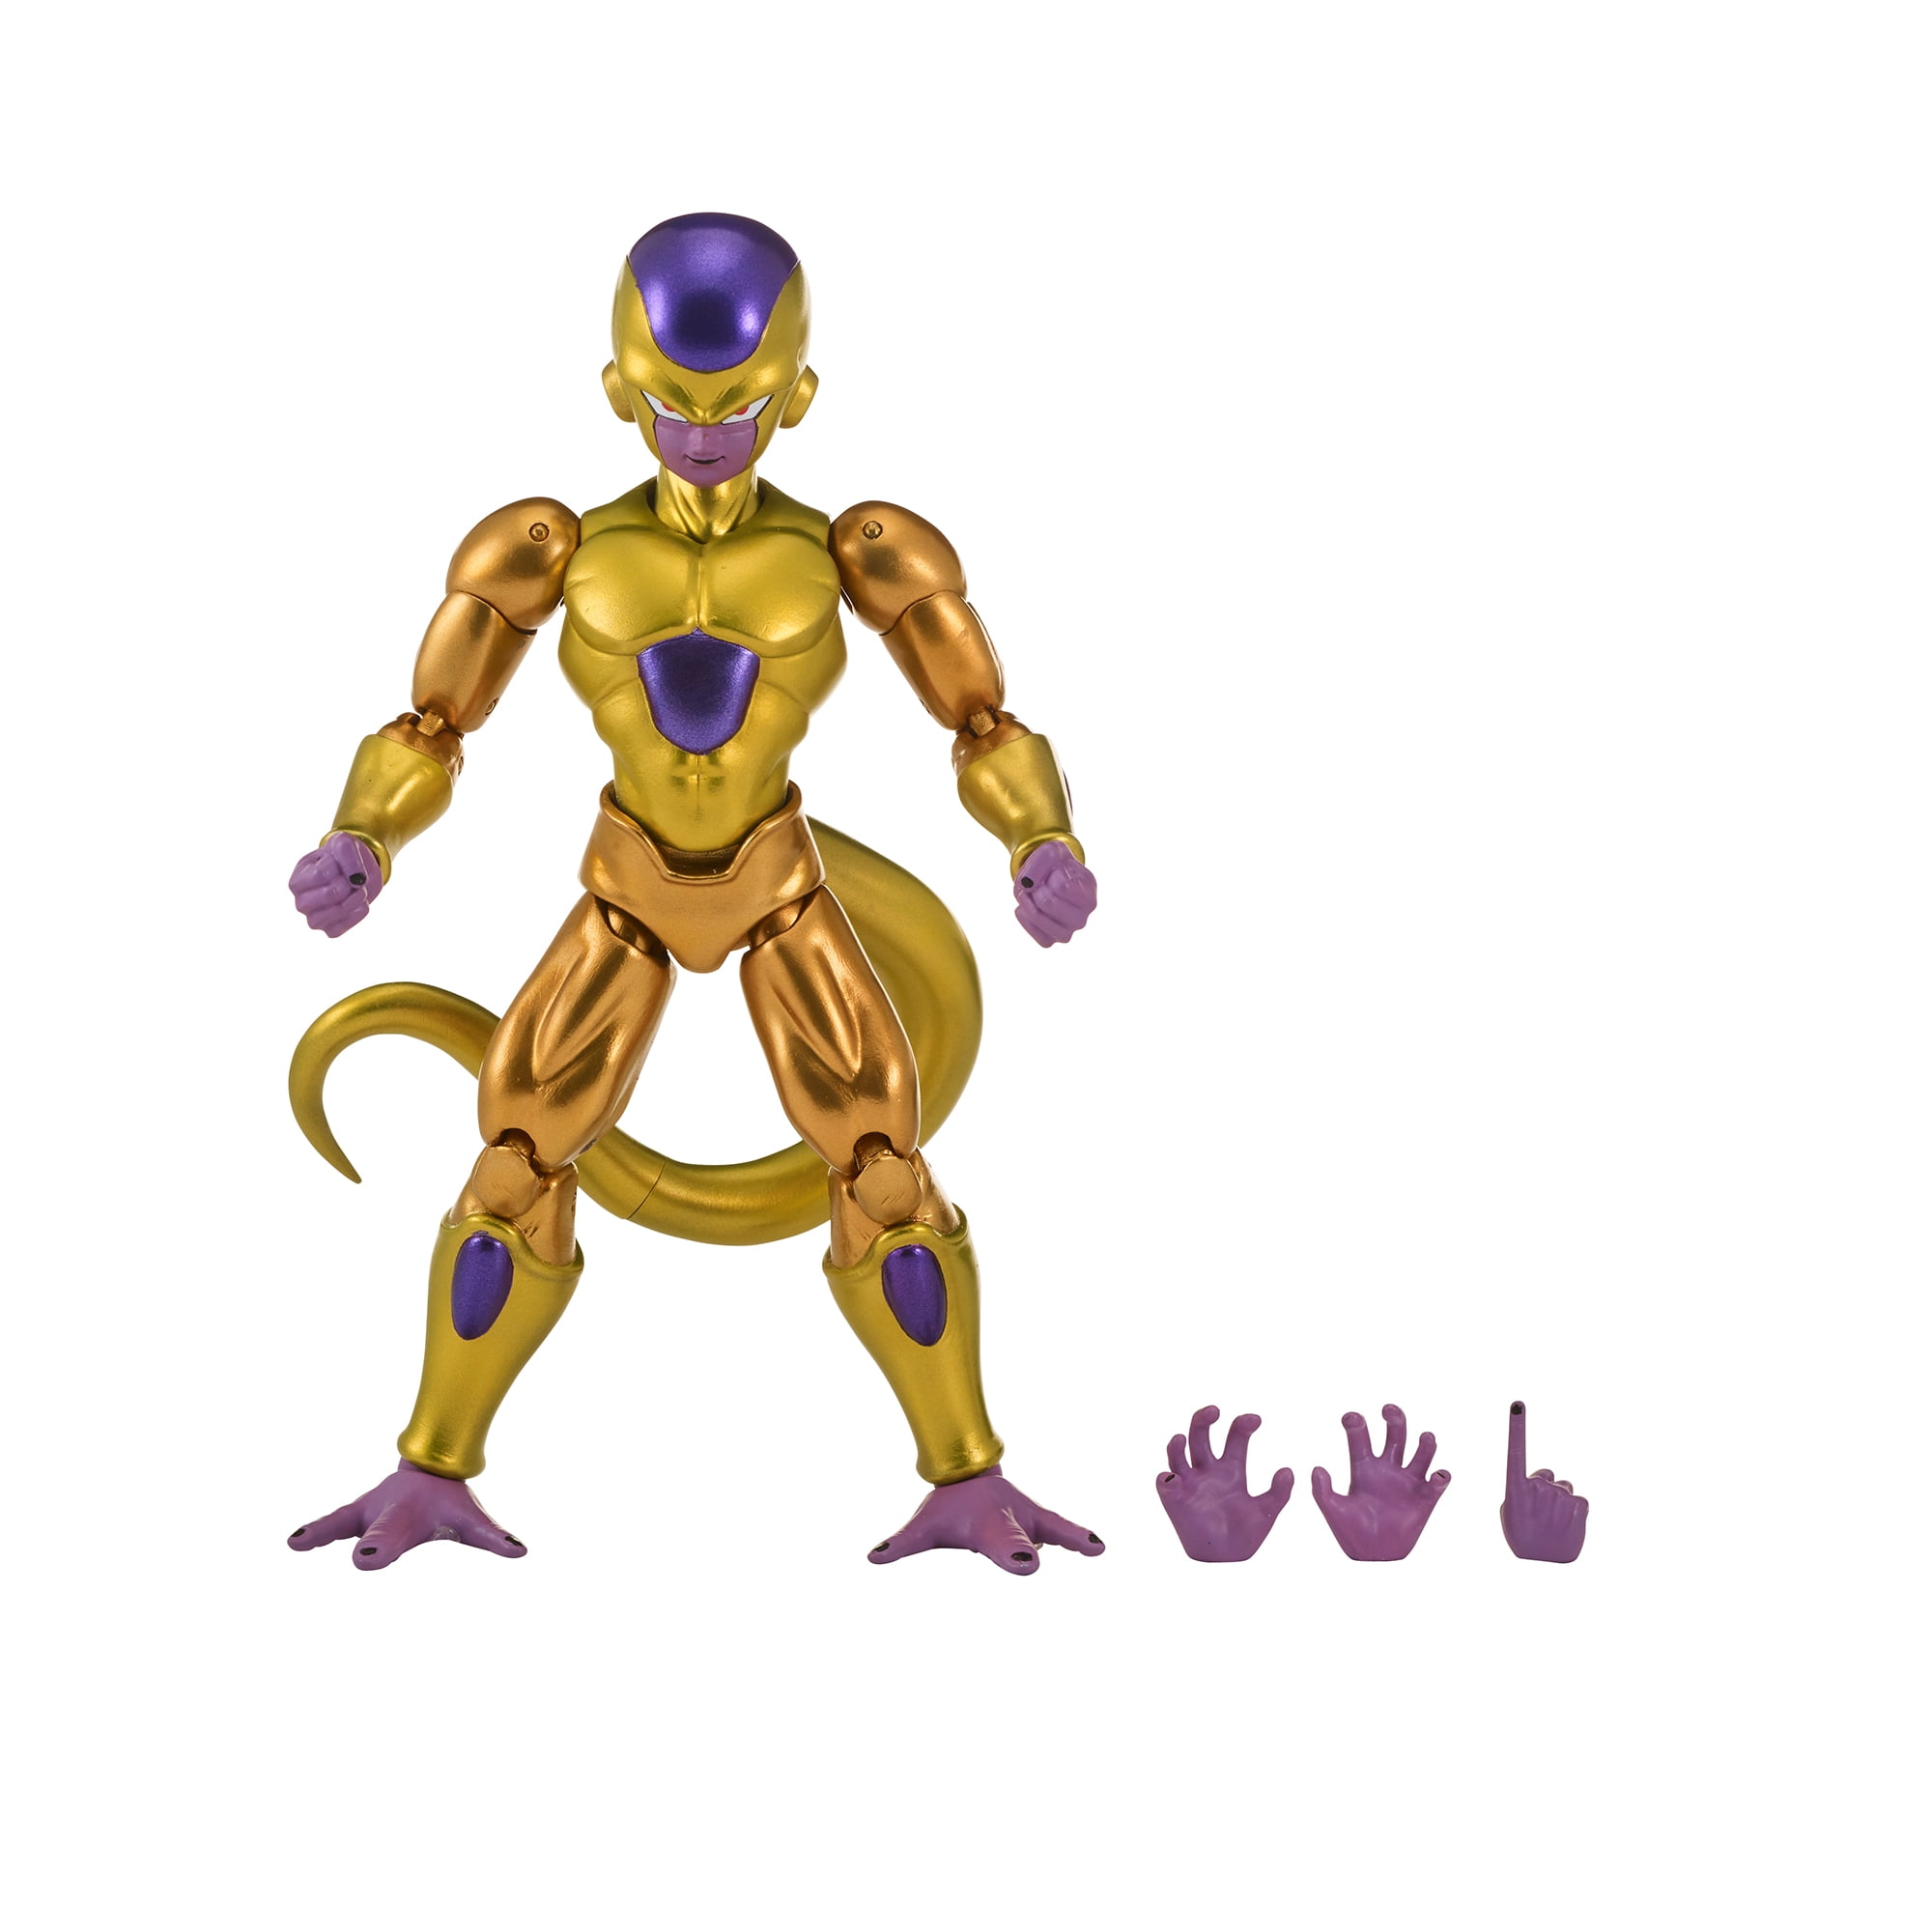 Dragon Ball Super Evolve 5" Golden Frieza Action Figure Toy New Gift Kids 2020 